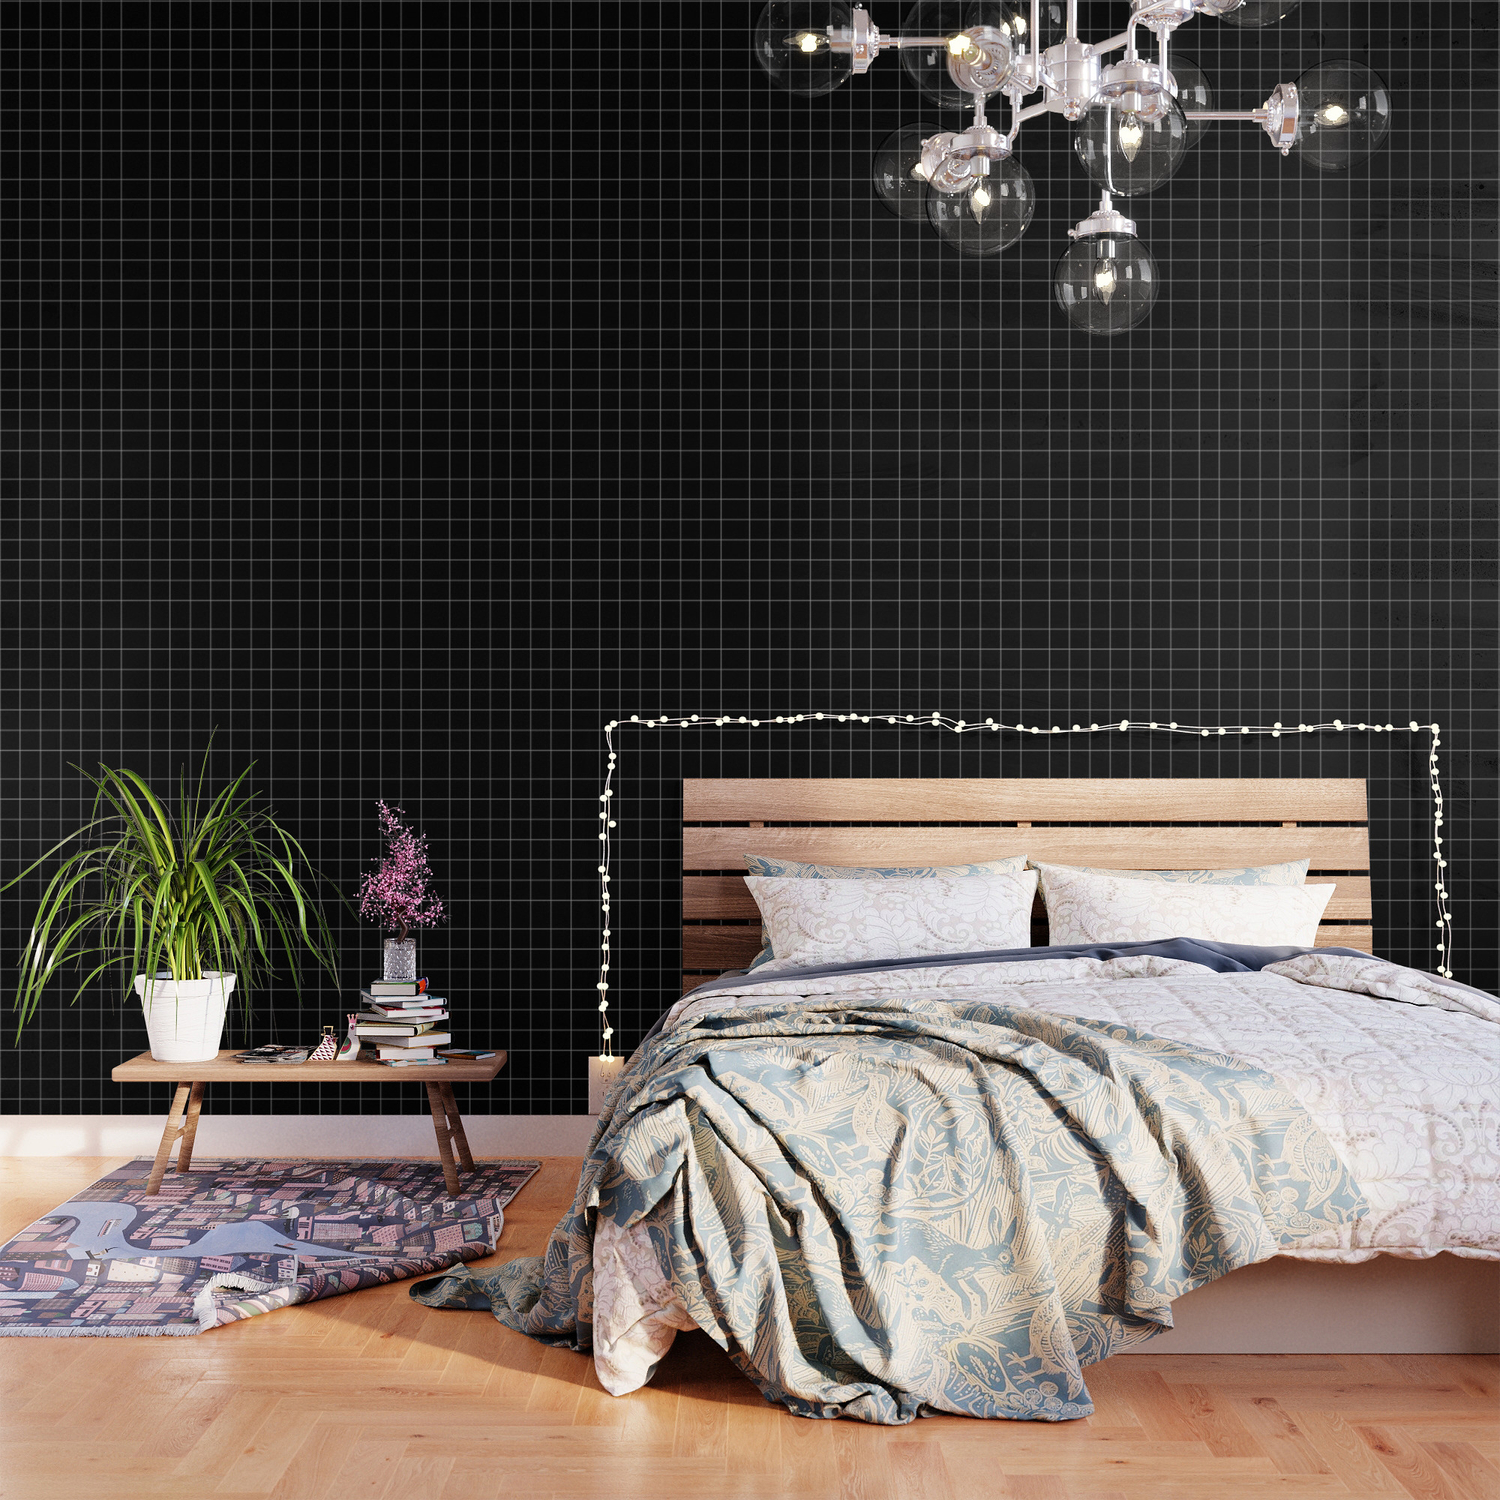 Society6 Black Grid /// Pencilmeinstationery.com by Pencil Me in on Throw Pillow